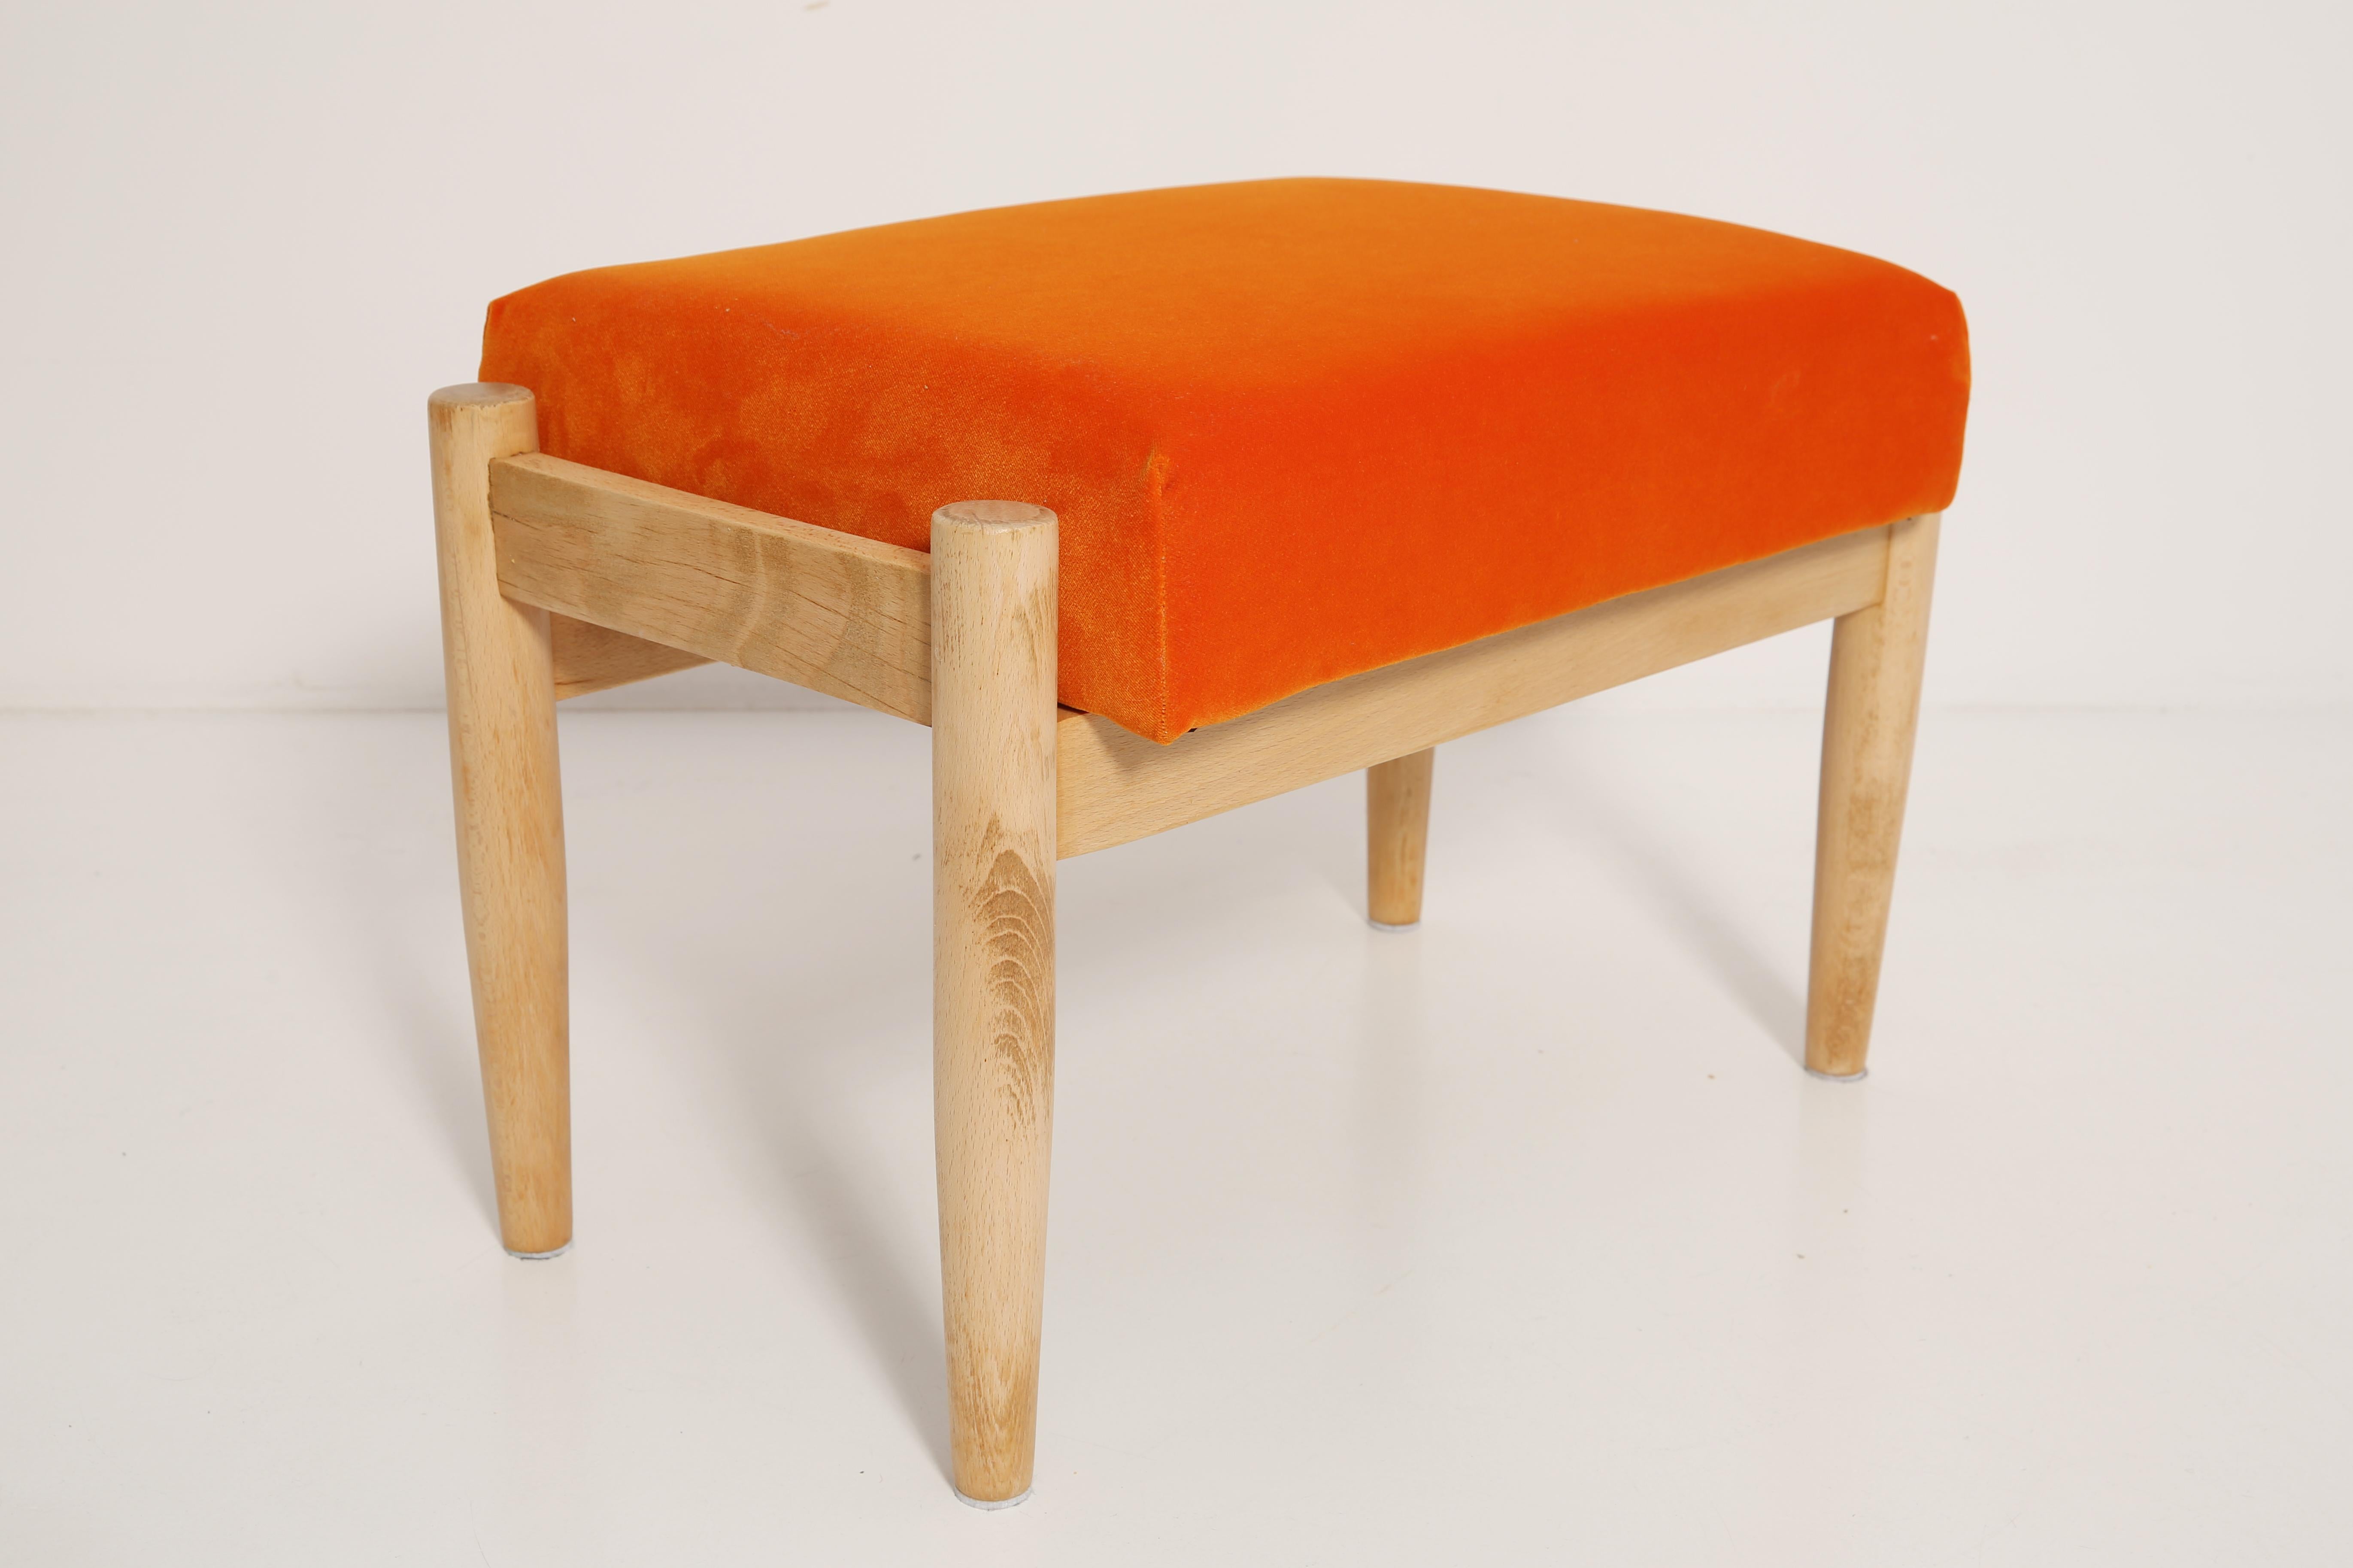 Stool from the turn of the 1960s. The stool consist of an upholstered part, a seat and wooden legs narrowing downwards, characteristic of the 1960s style.

Stool was designed by Edmund Homa, a Polish architect, designer of industrial design and